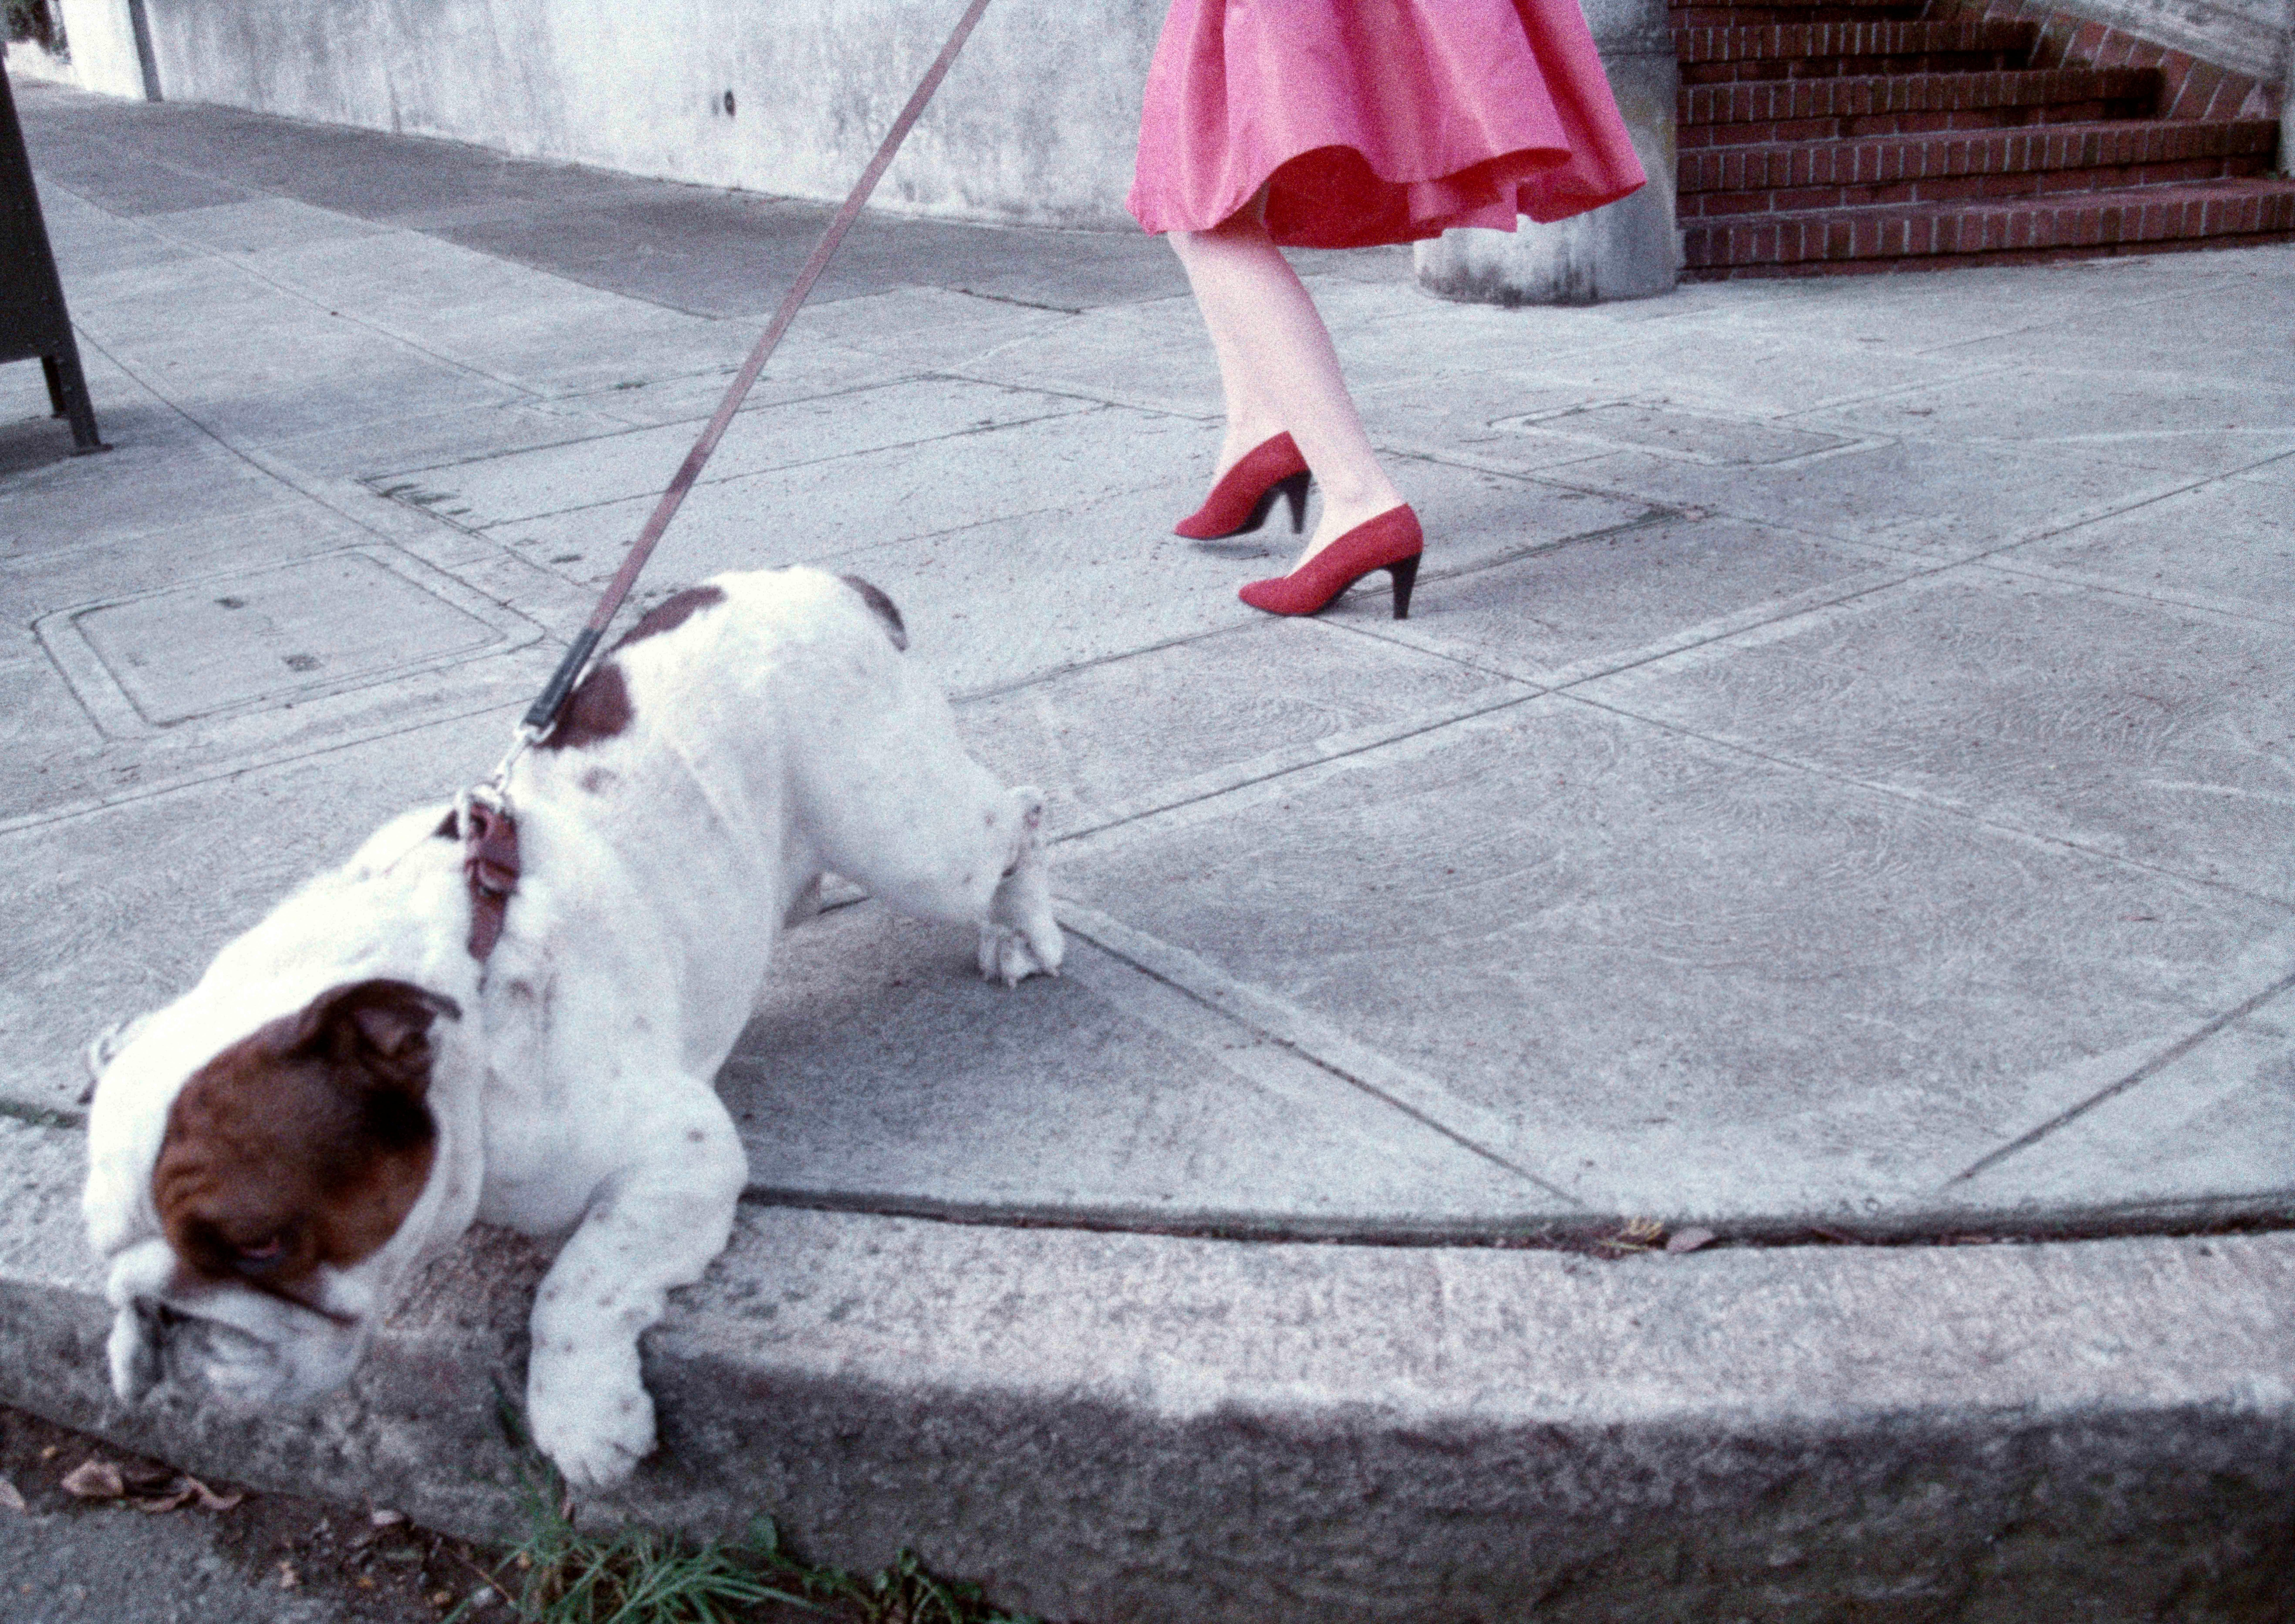 Red Shoes and a Bulldog, 1991
Archival pigment print
30” x 40” (76.2x101.6 cm) 
Edition of 10 
signed and numbered
$ 9,000.00

40” x 60” (101.6x152.4 cm) 
Edition of 10 
signed and numbered
$12,000.00